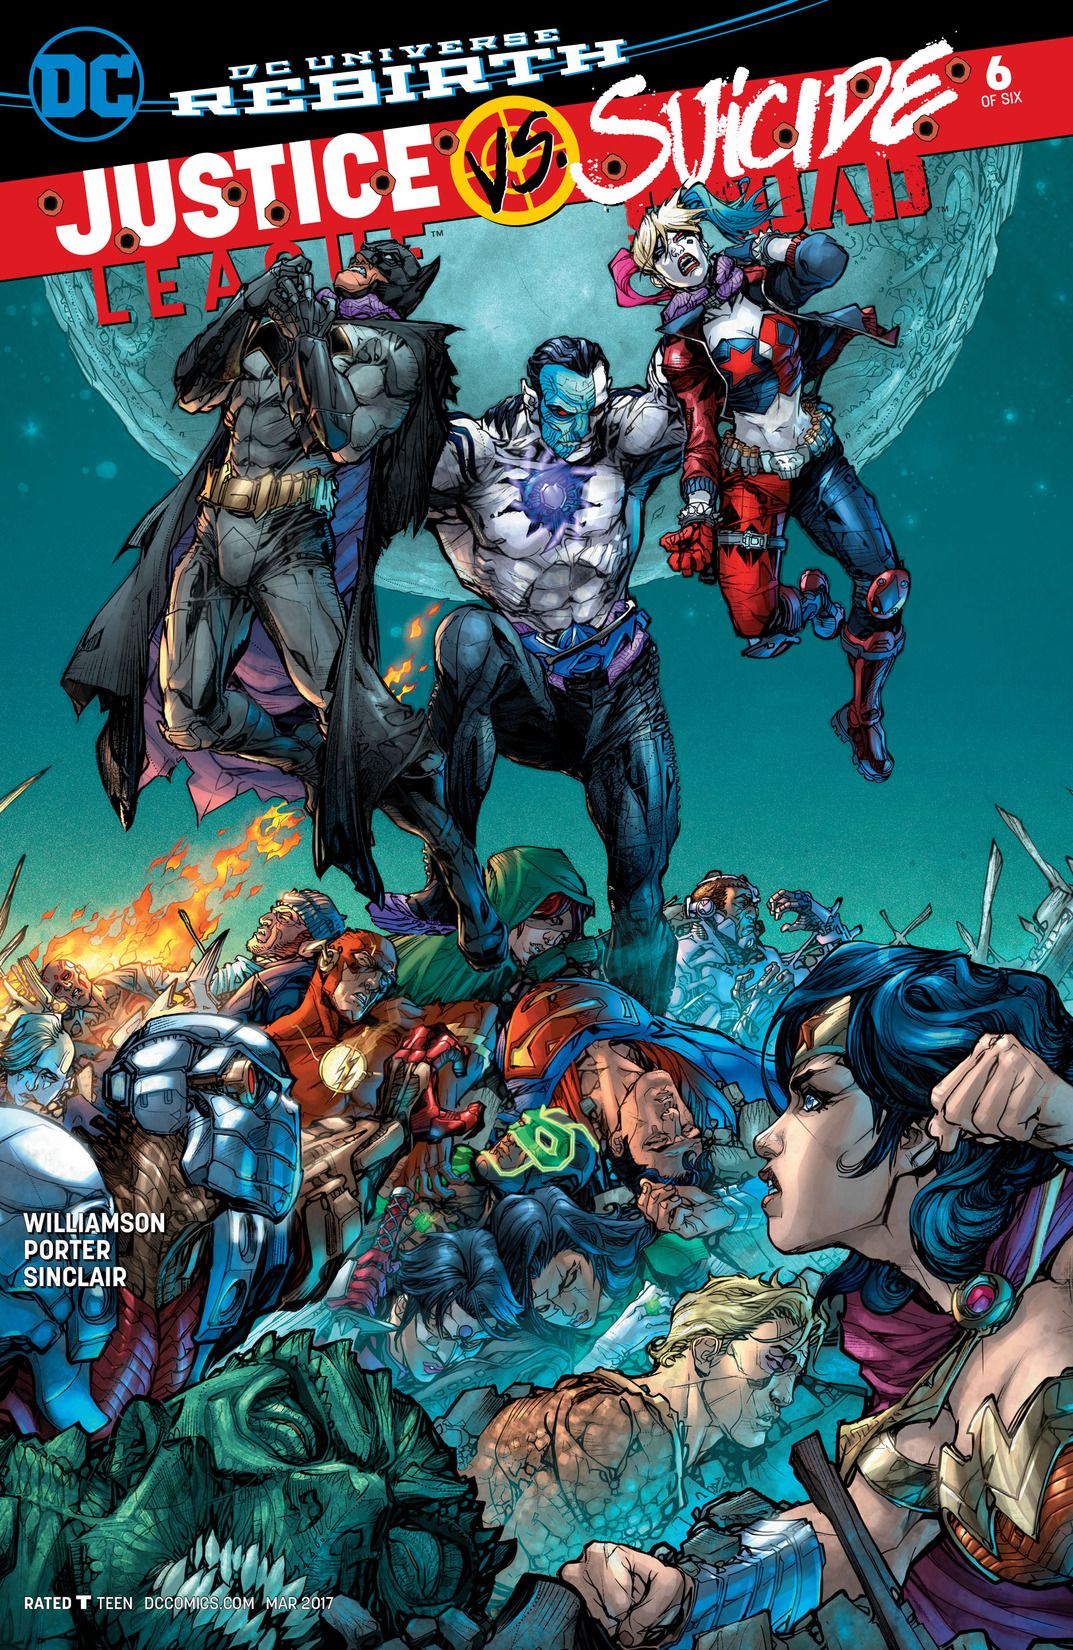 Justice League Vs Suicide Squad Vol 1 6 Dc Database Fandom Powered By Wikia